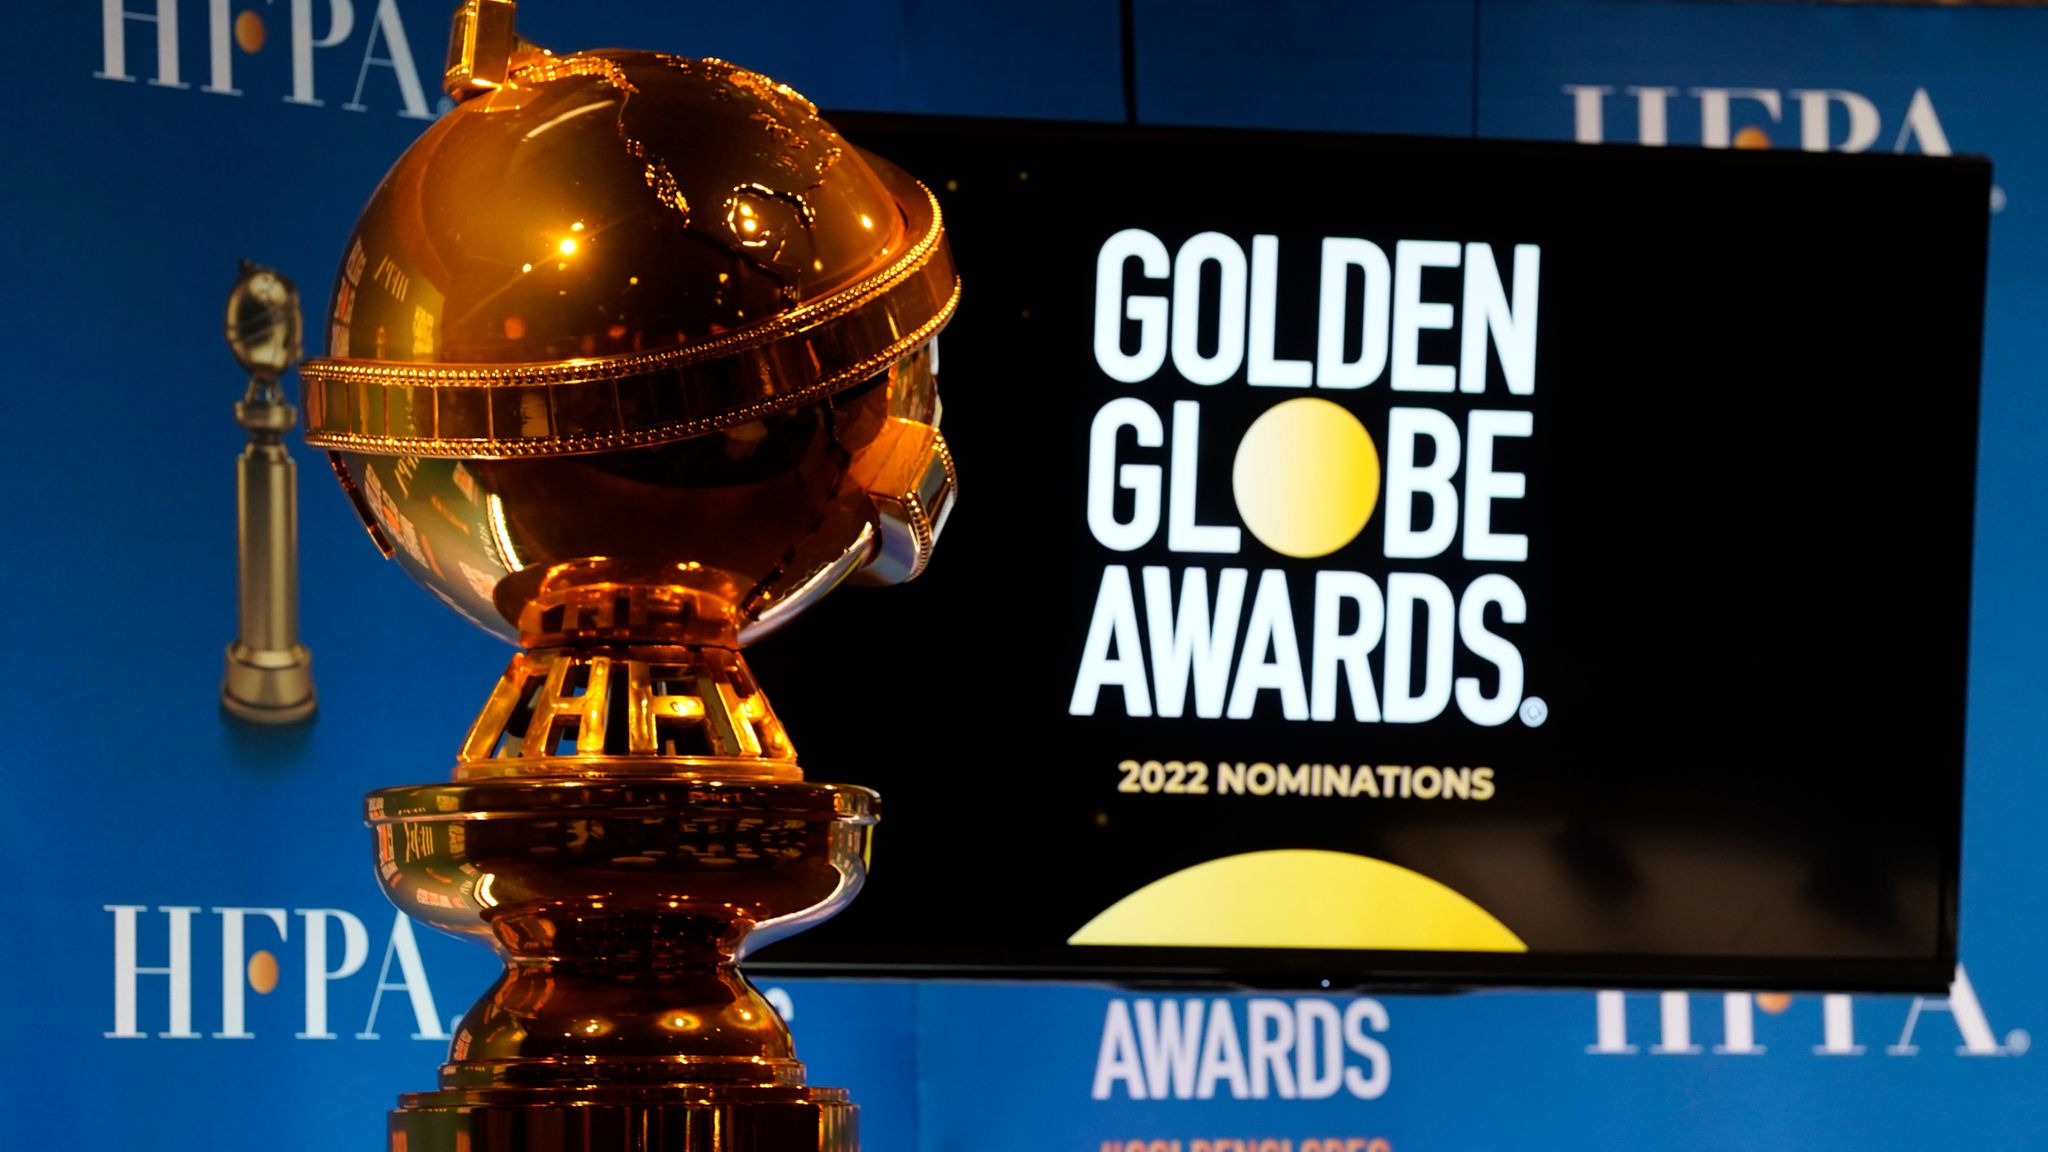 The Golden Globes 2022 awards will take place on Sunday 9 January in Los Angeles